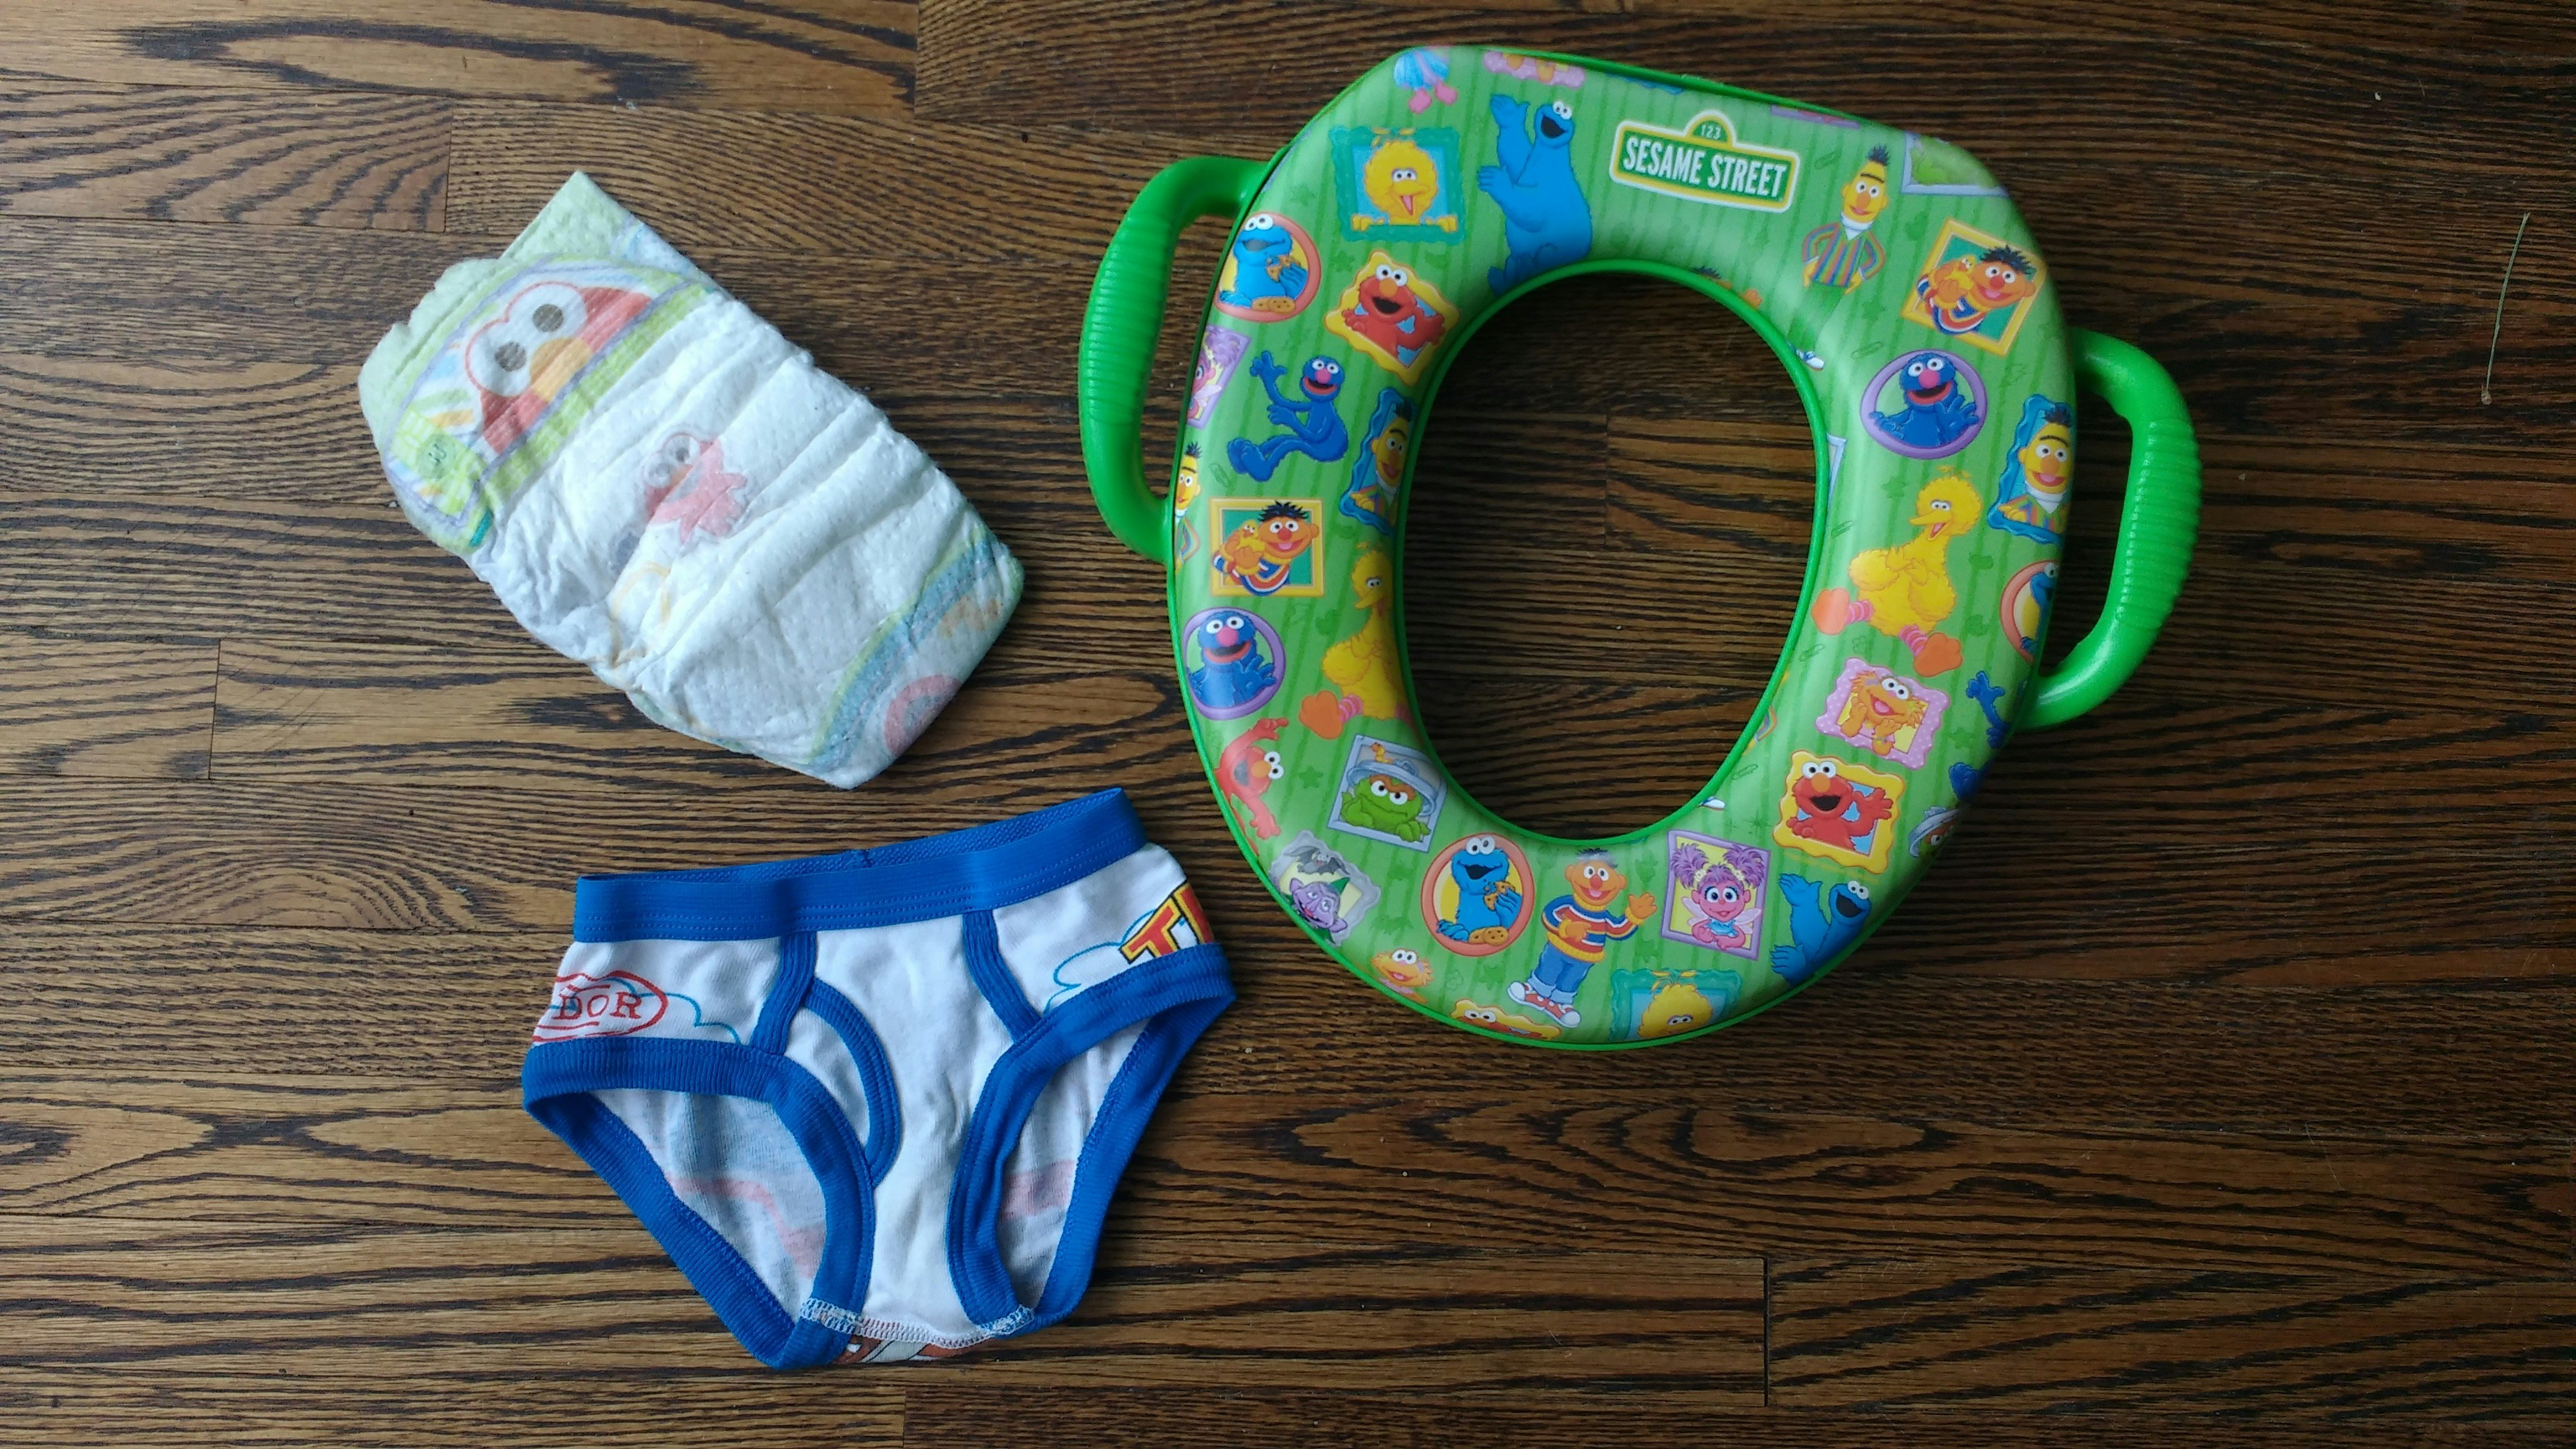 3 Day Potty Training: The Insider's Guide